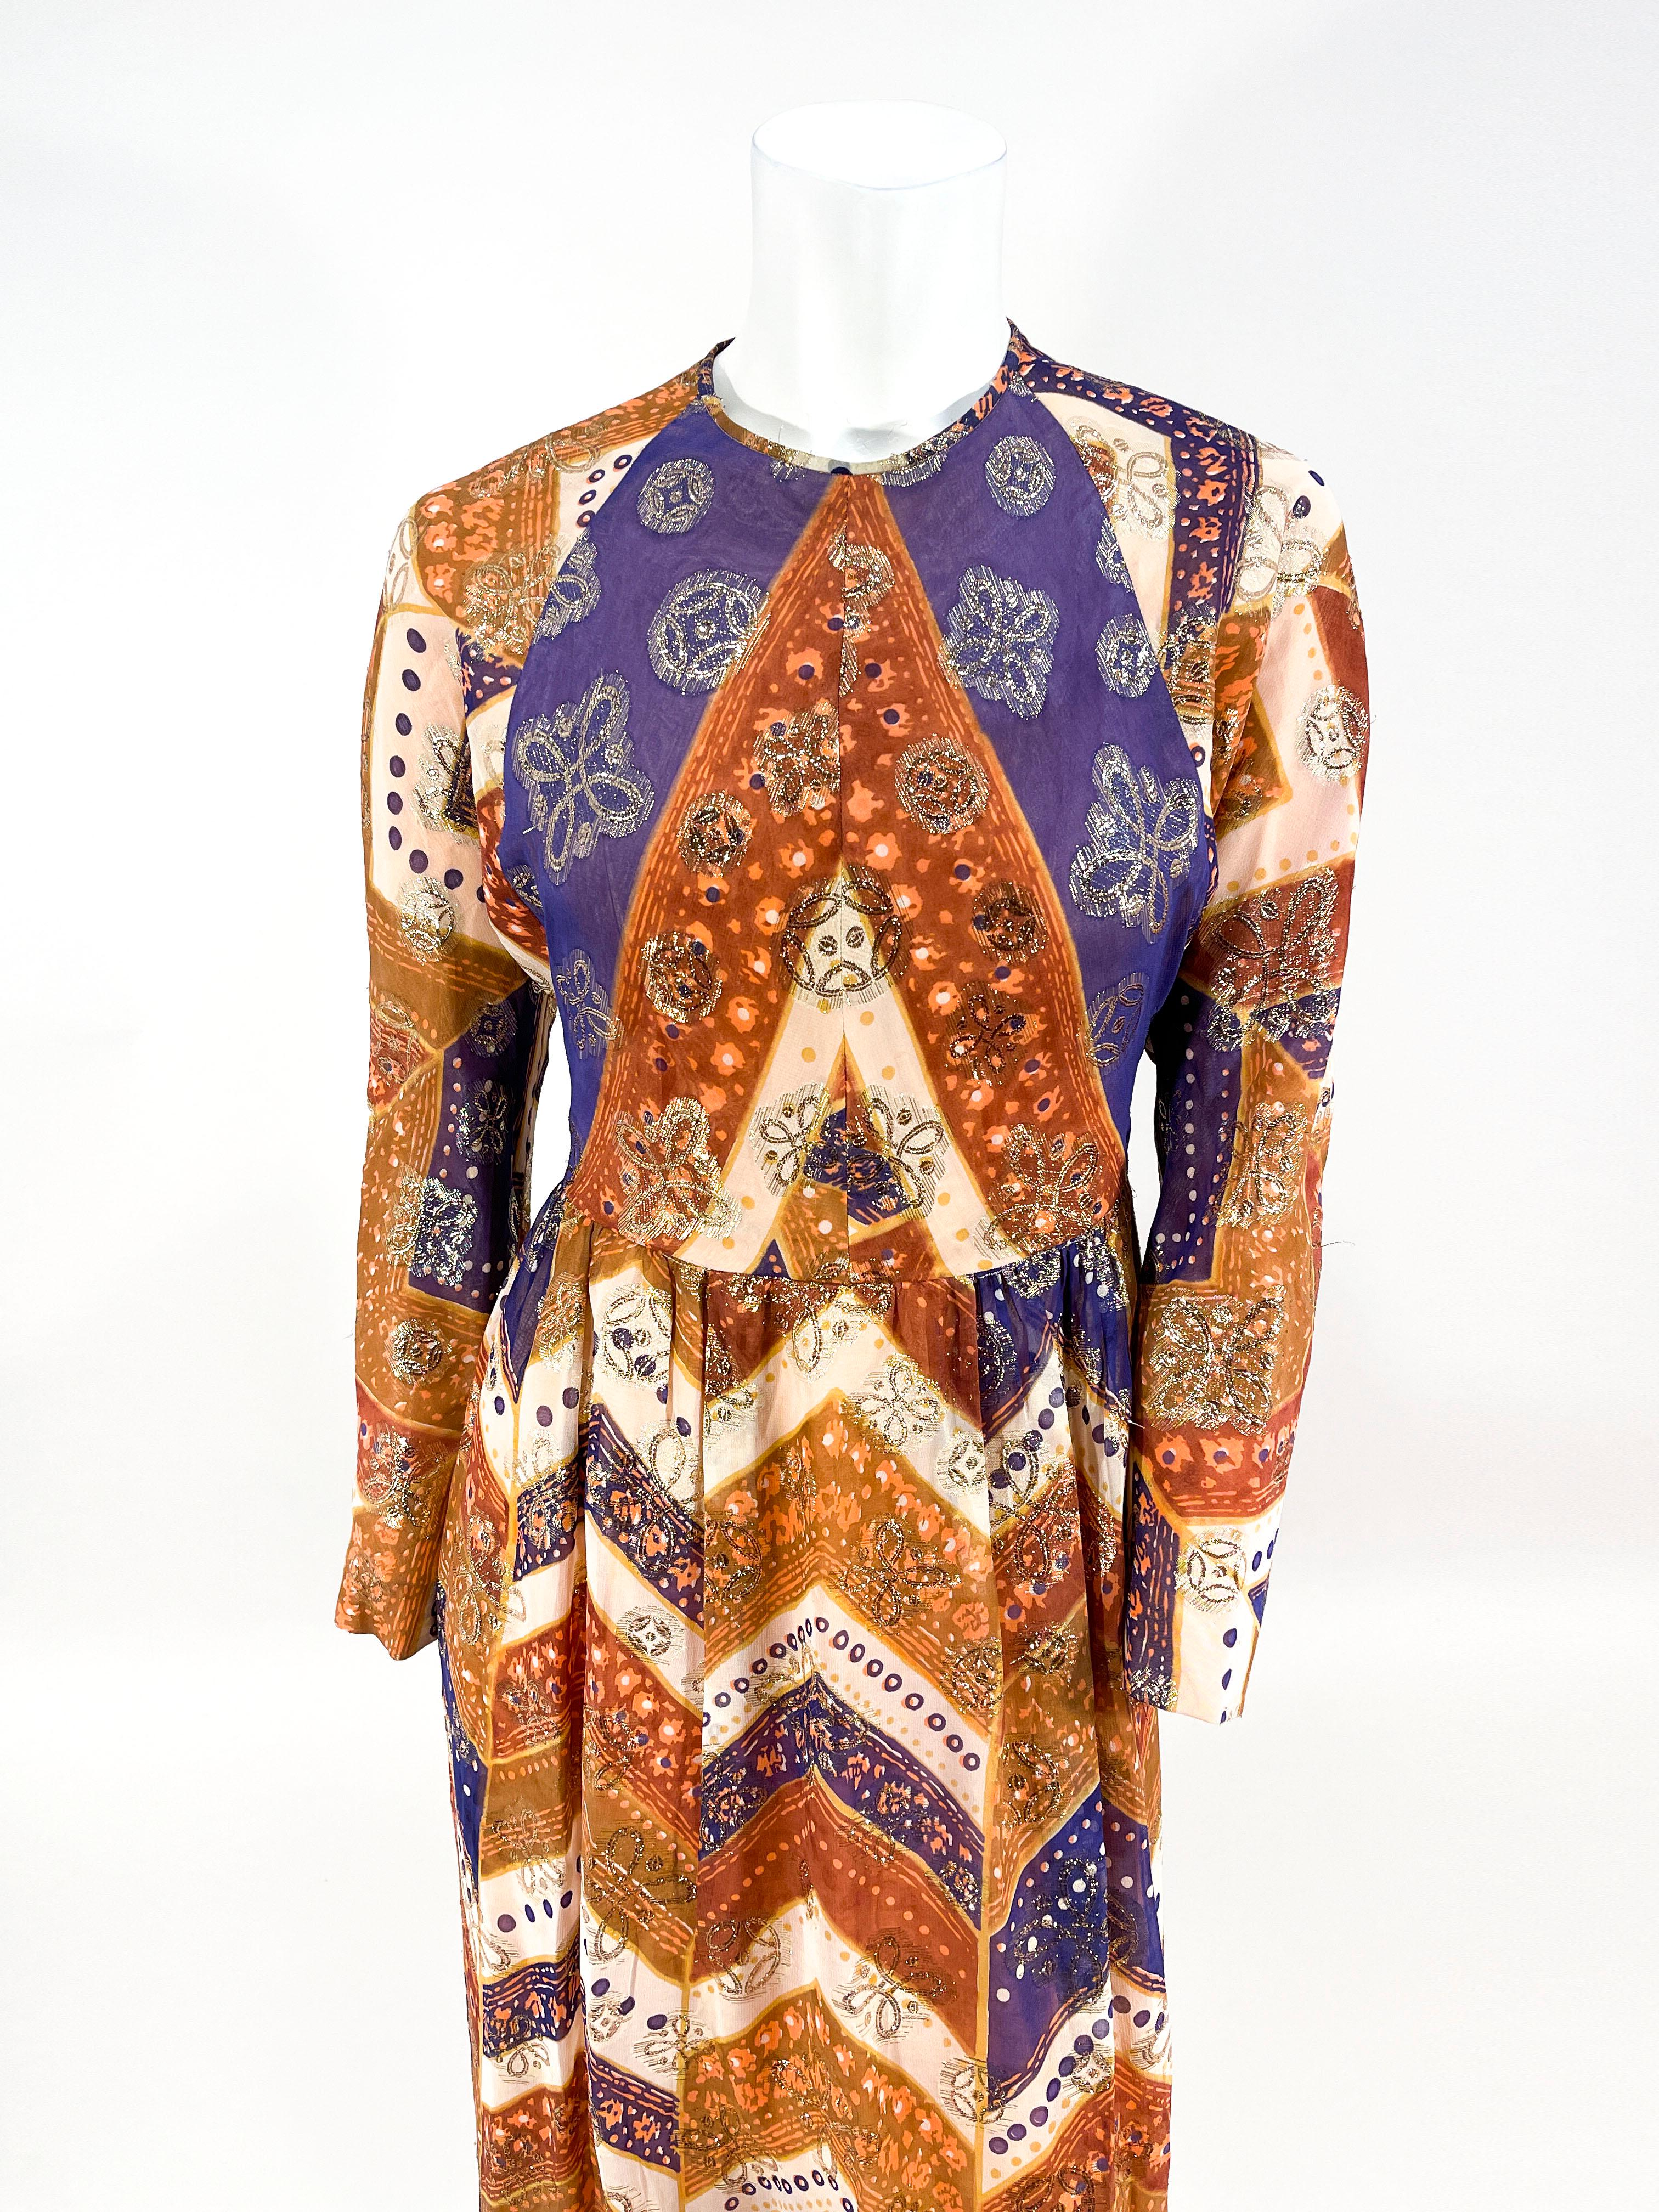 1970s Anthony Muto purple, rust, and beige chevron printed dress. The chiffon textile also features a gold metallic lurex weave in an abstract geometric pattern. The shilouette features a round neckline, long raglan sleeves, a fitted waist, and full